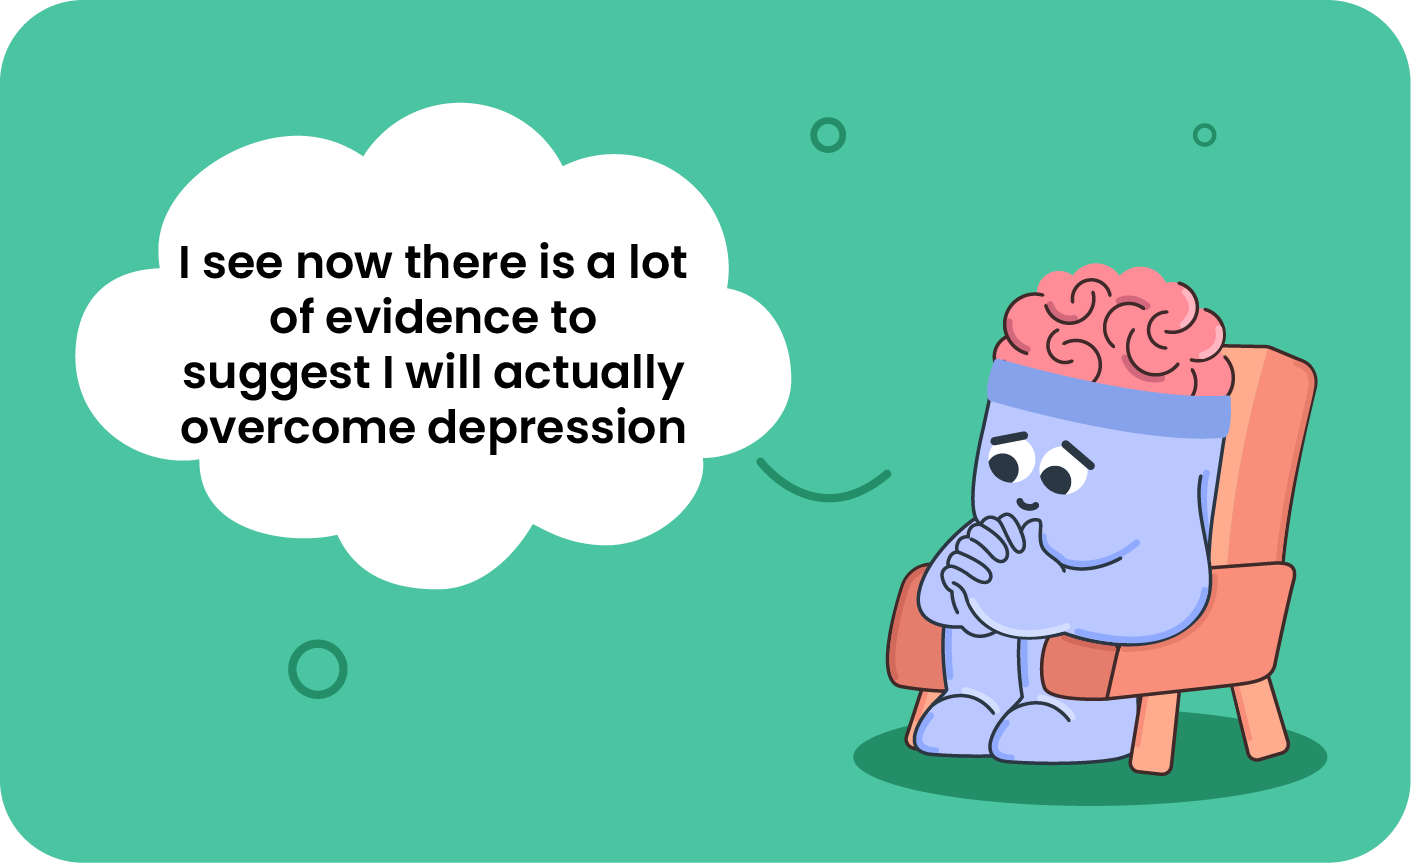 Thinking Patterns That Can Falsely Convince You "I Will Never Overcome Depression"